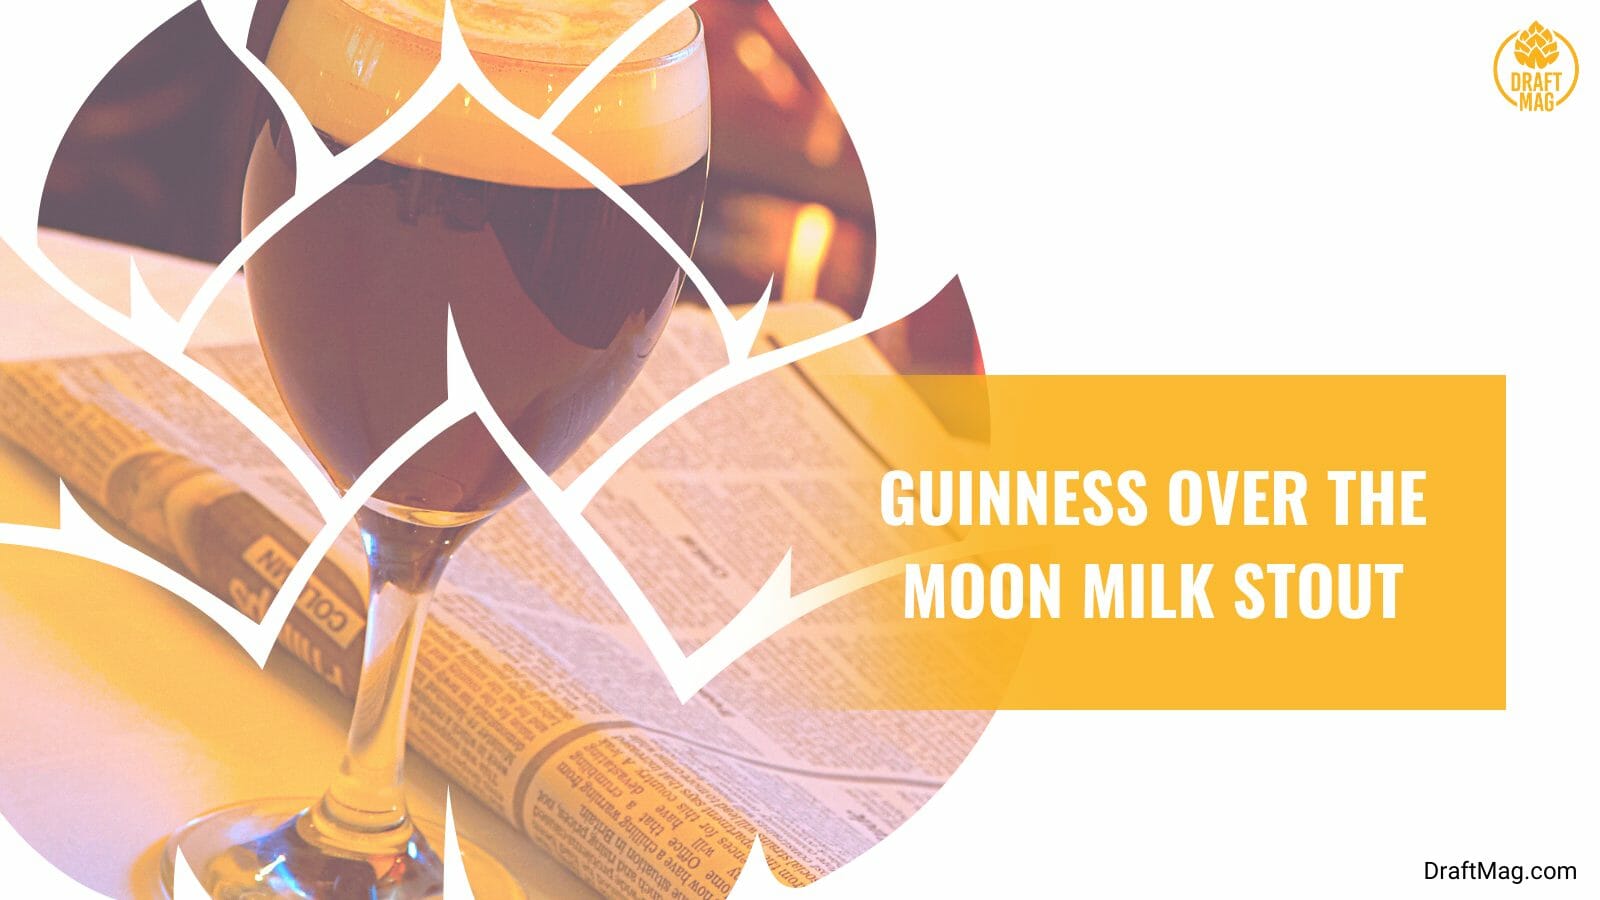 Guinness over the moon milk stout